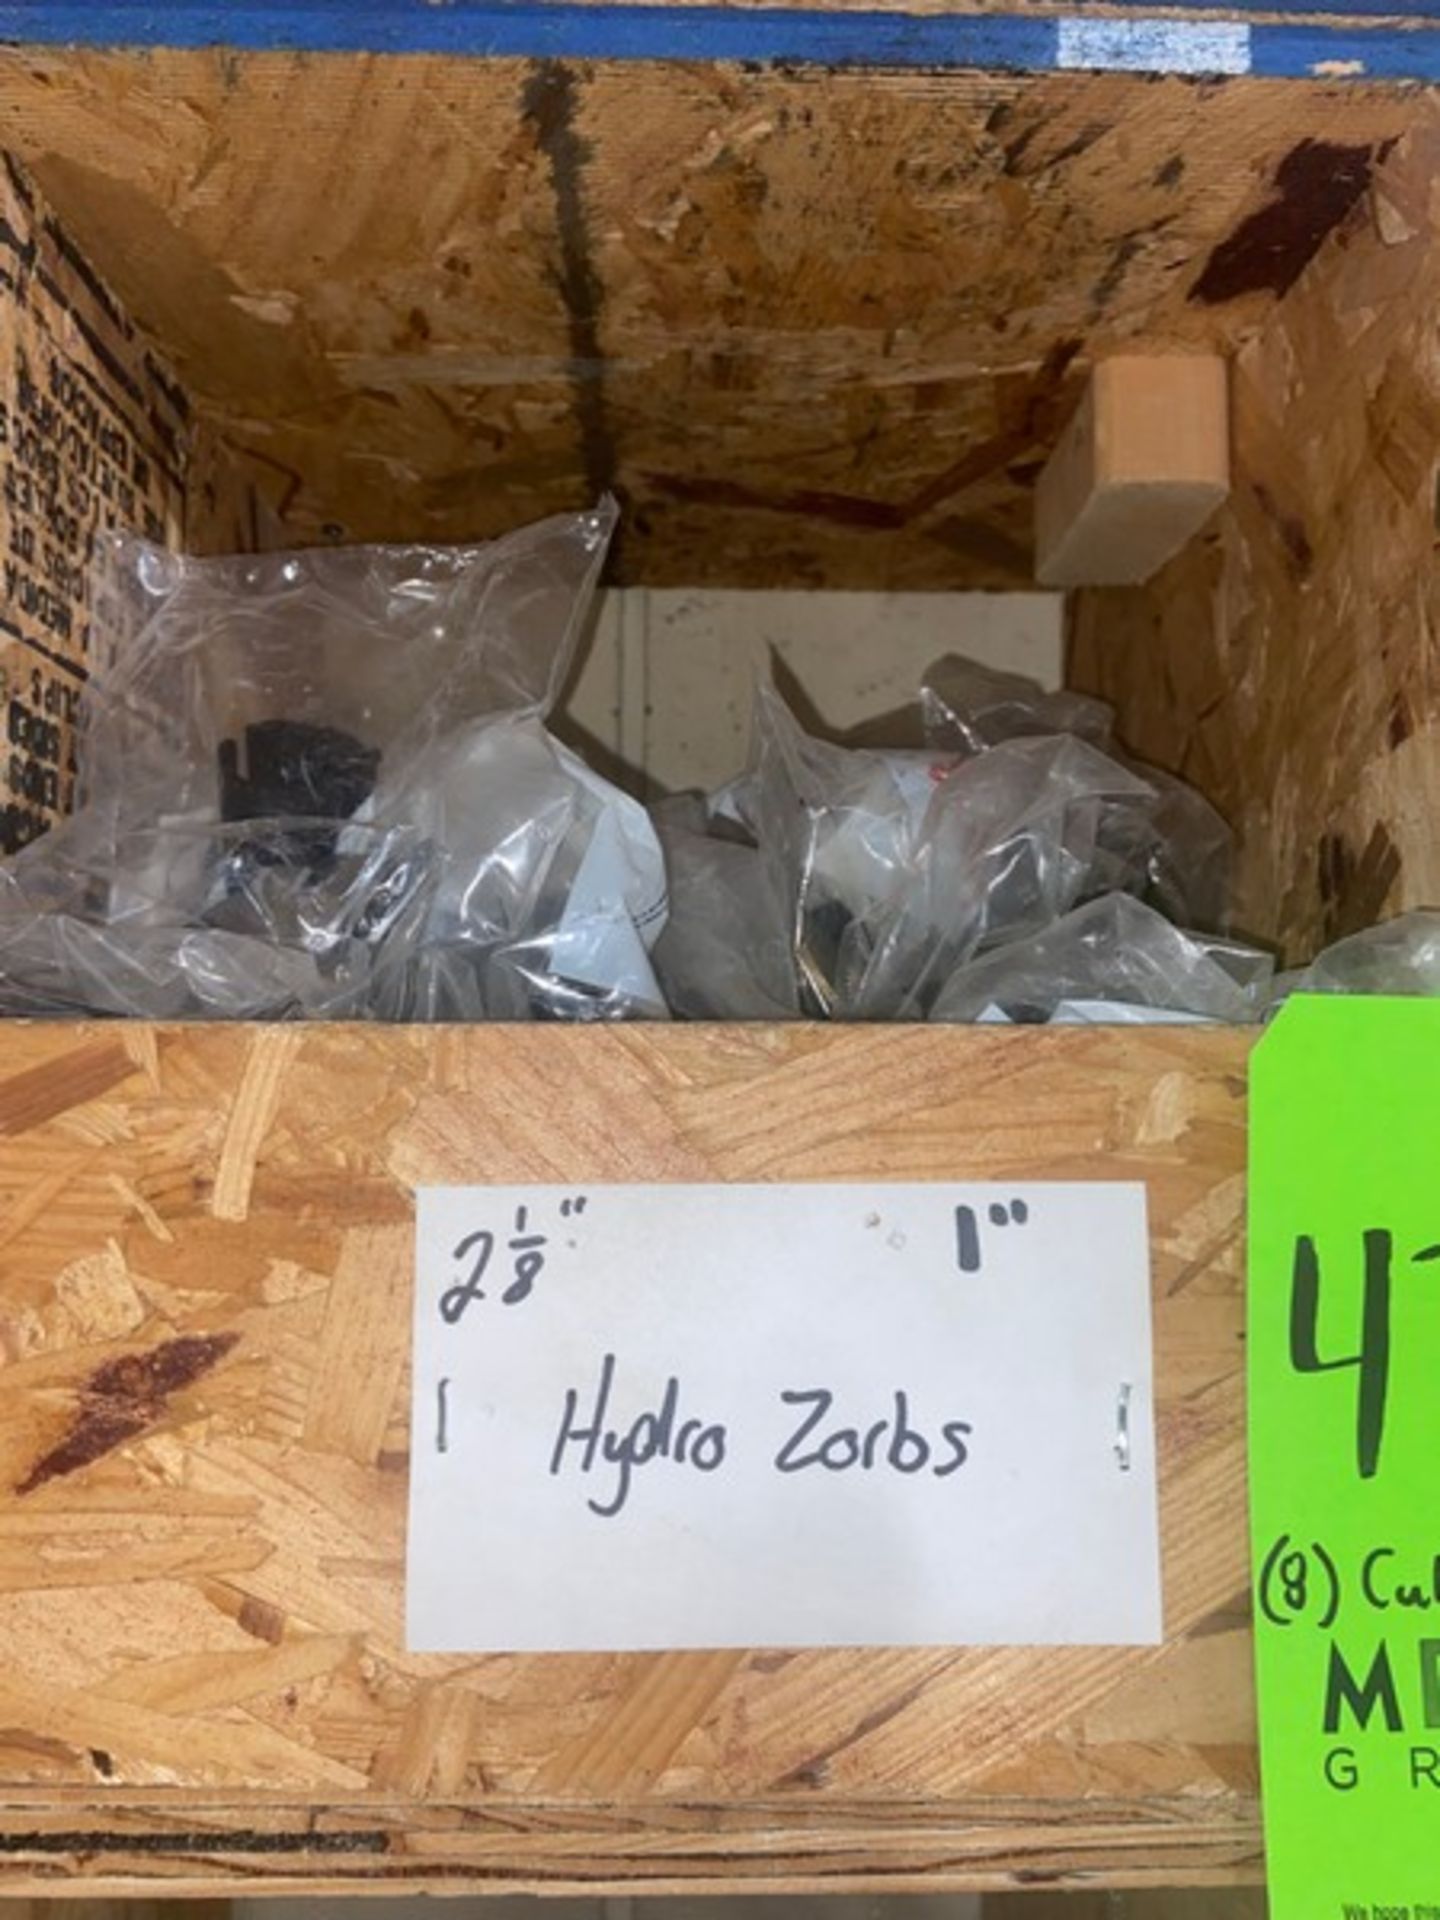 Contents of (8) Cubby’s, Includes Assortment of 5/8” Hydro Zorbs, 7/8” Hydra-Zorbs, 1-5/8” Hydro- - Bild 8 aus 9